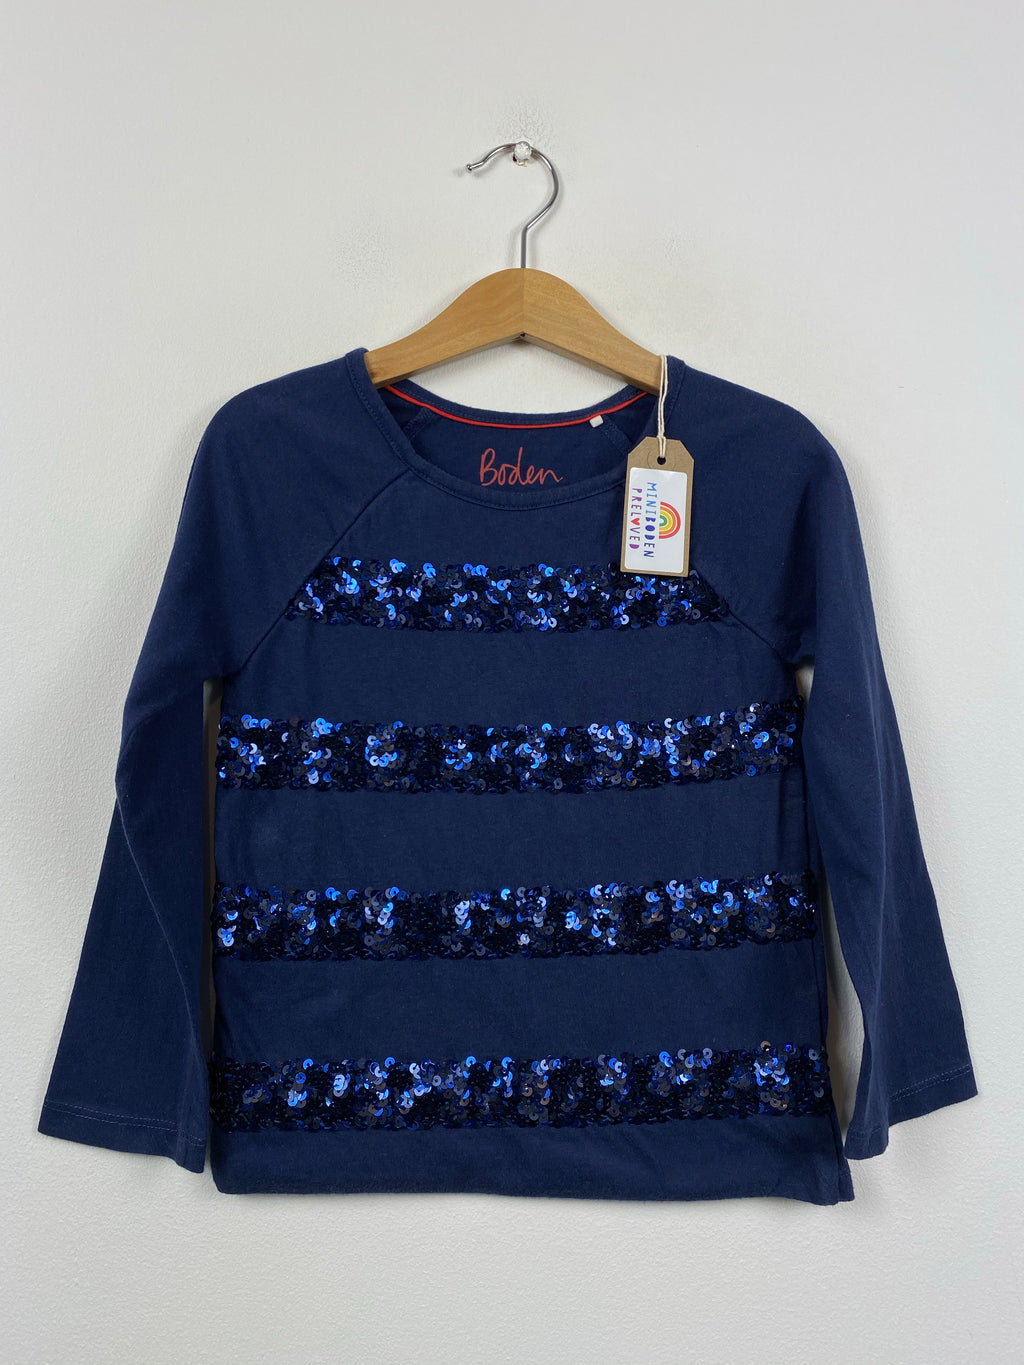 Fabulous Navy Sequin Party Top (3-4 Years)